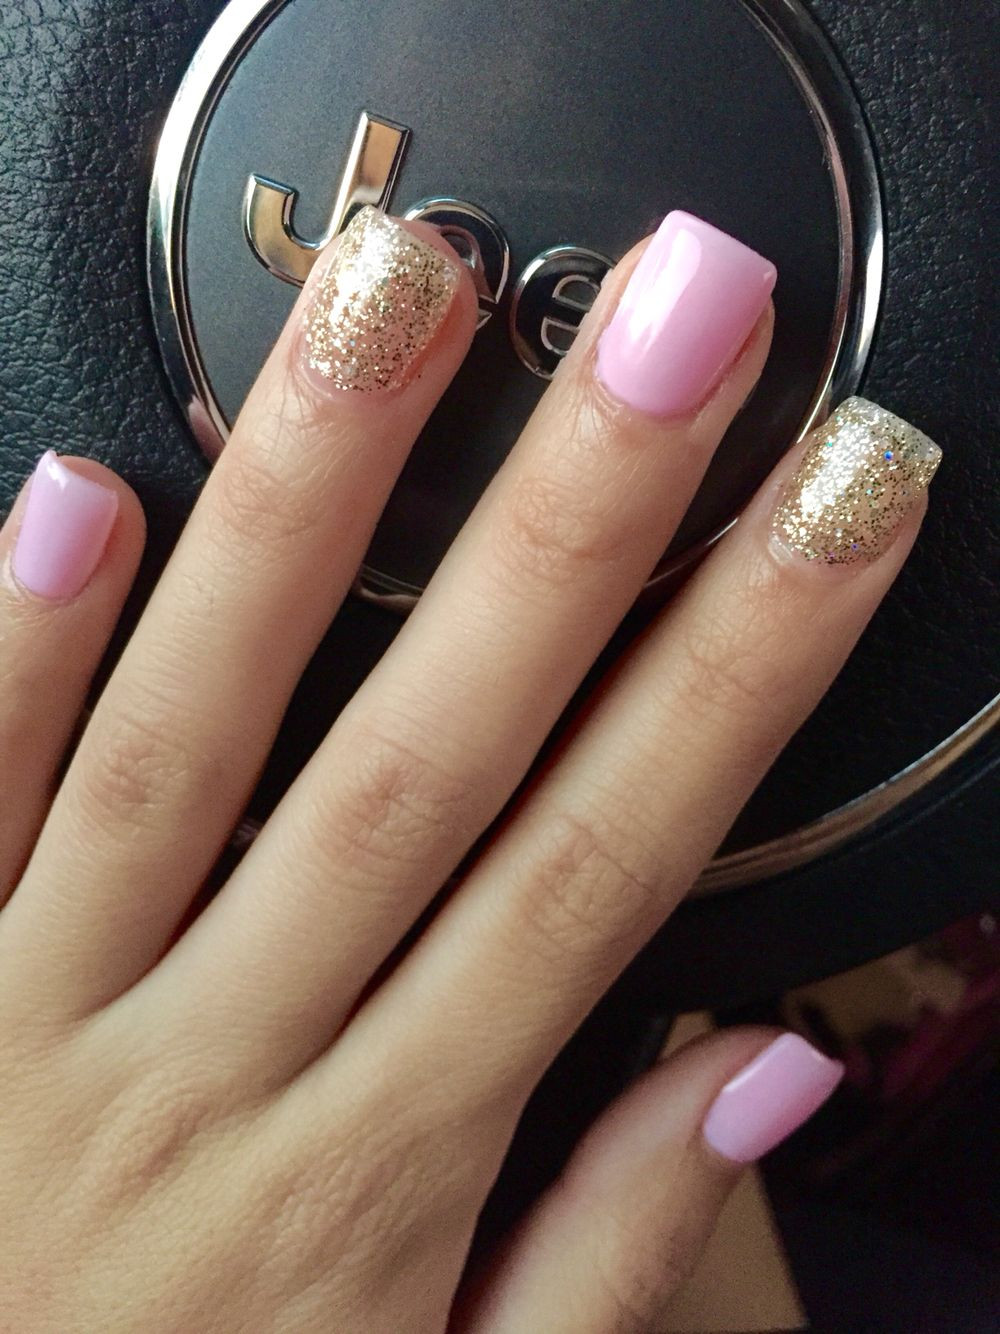 Light Pink Nails With Gold Glitter
 Light pink and gold glitter nails